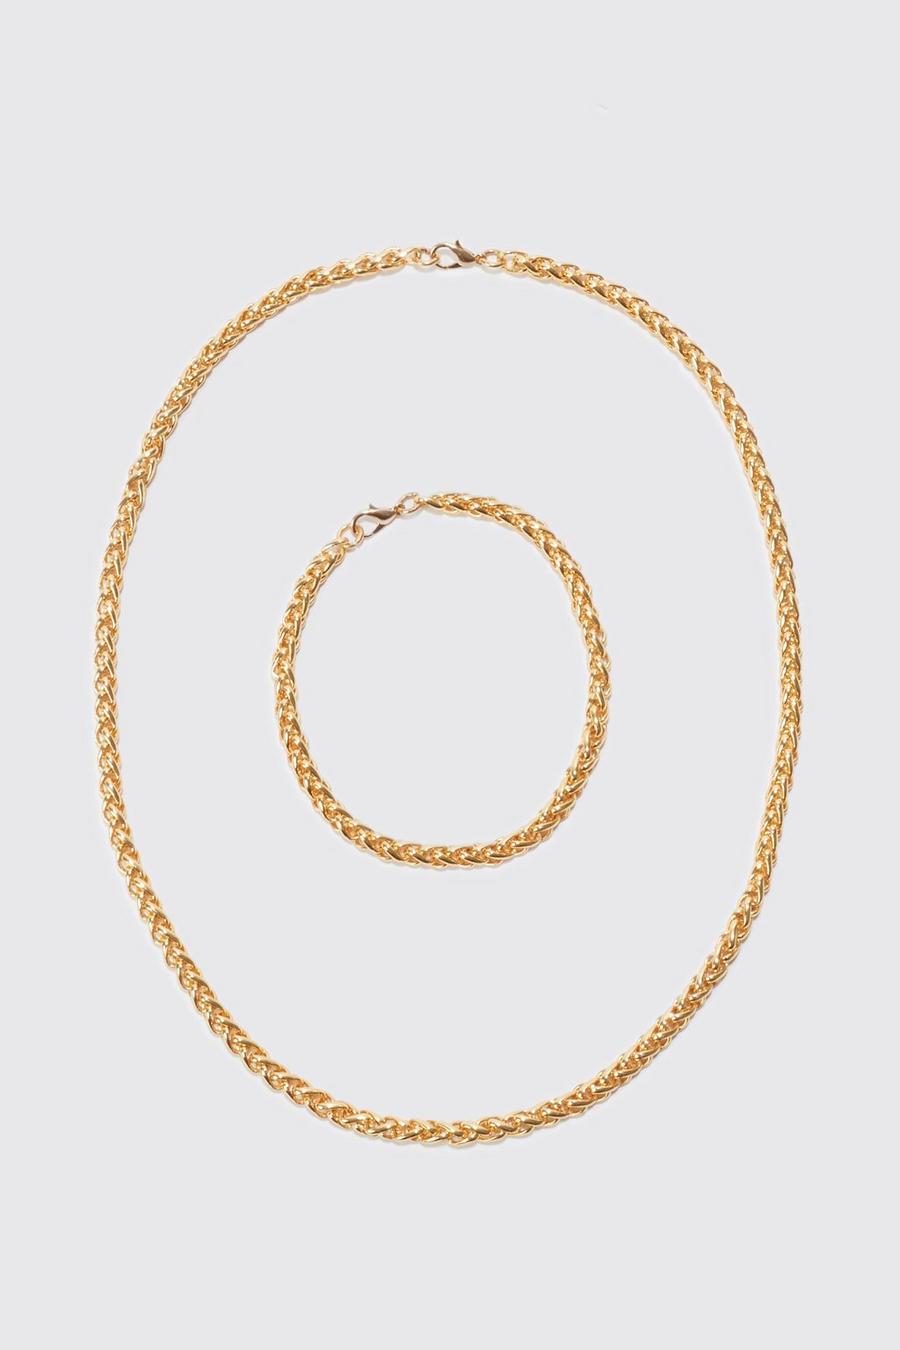 Gold Rope Chain Necklace And Bracelet Set